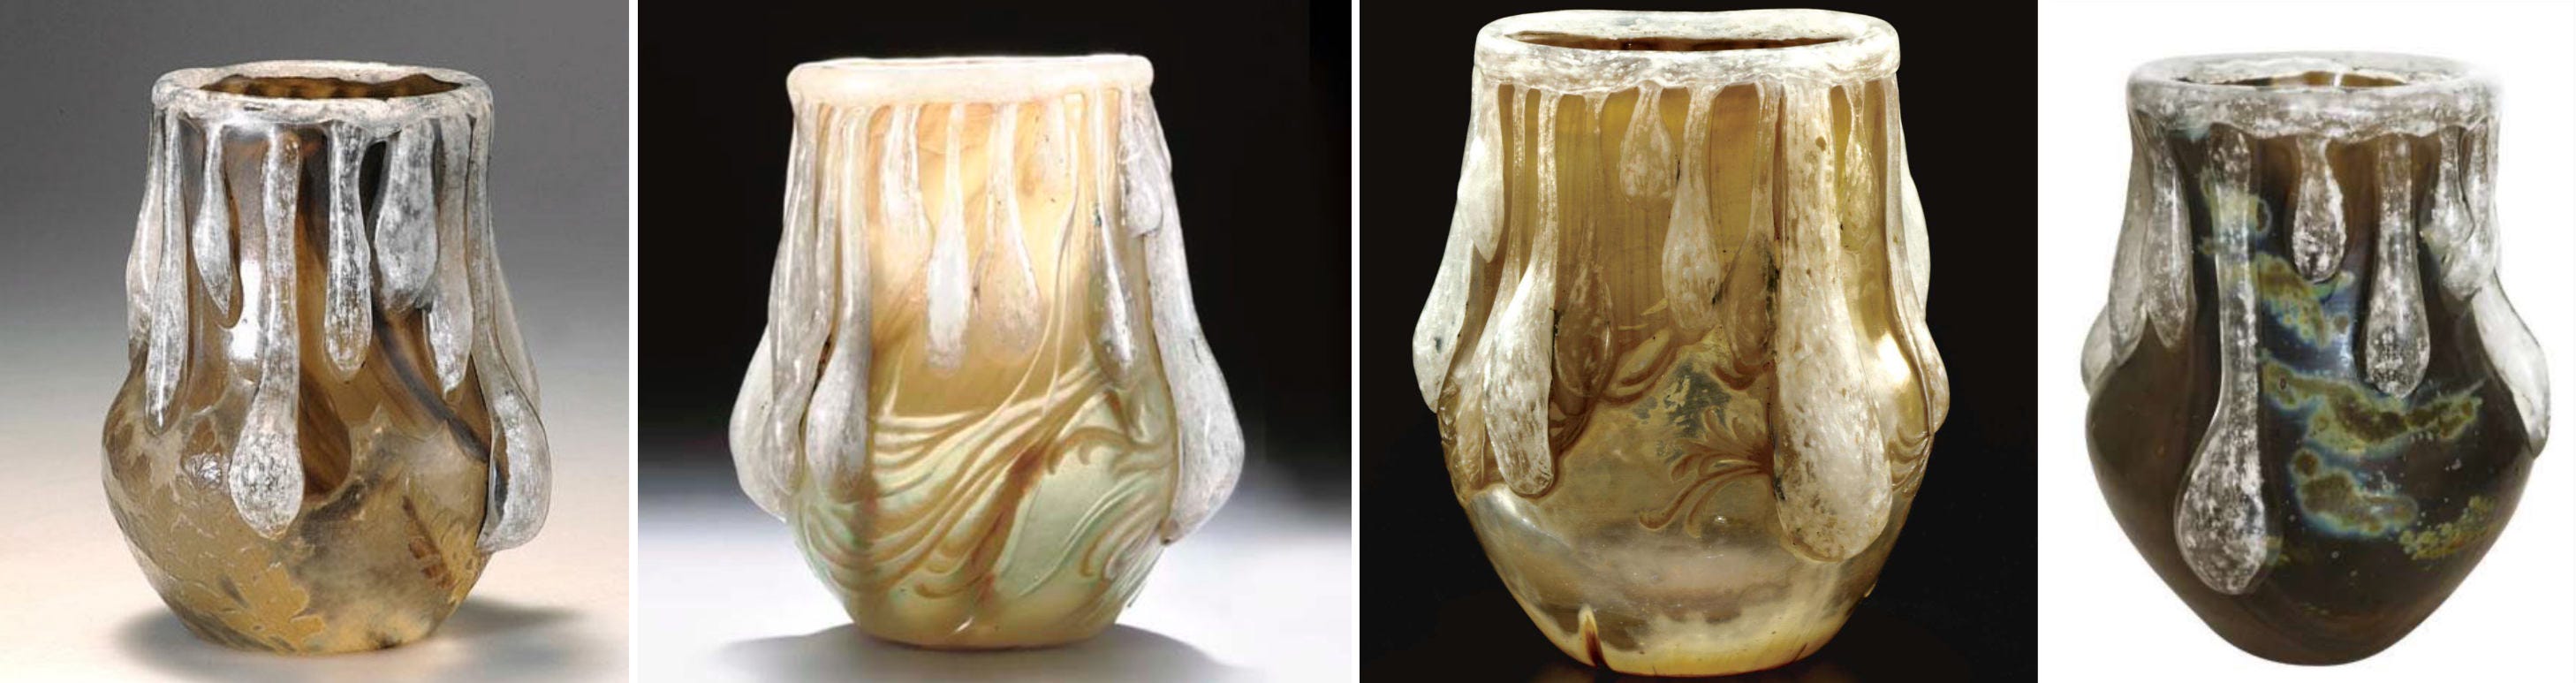 Four specimens of the Écume de mer vase, from left to right: Quittenbaum 28.04.2009 lot 135 ; Christie's 23.03.2006 lot 123 ; Sotheby's 02.04.2008 lot 125 (the same as Christie's ?) ; ex Marcilhac collection, Besch 30.10.2016 lot 139.